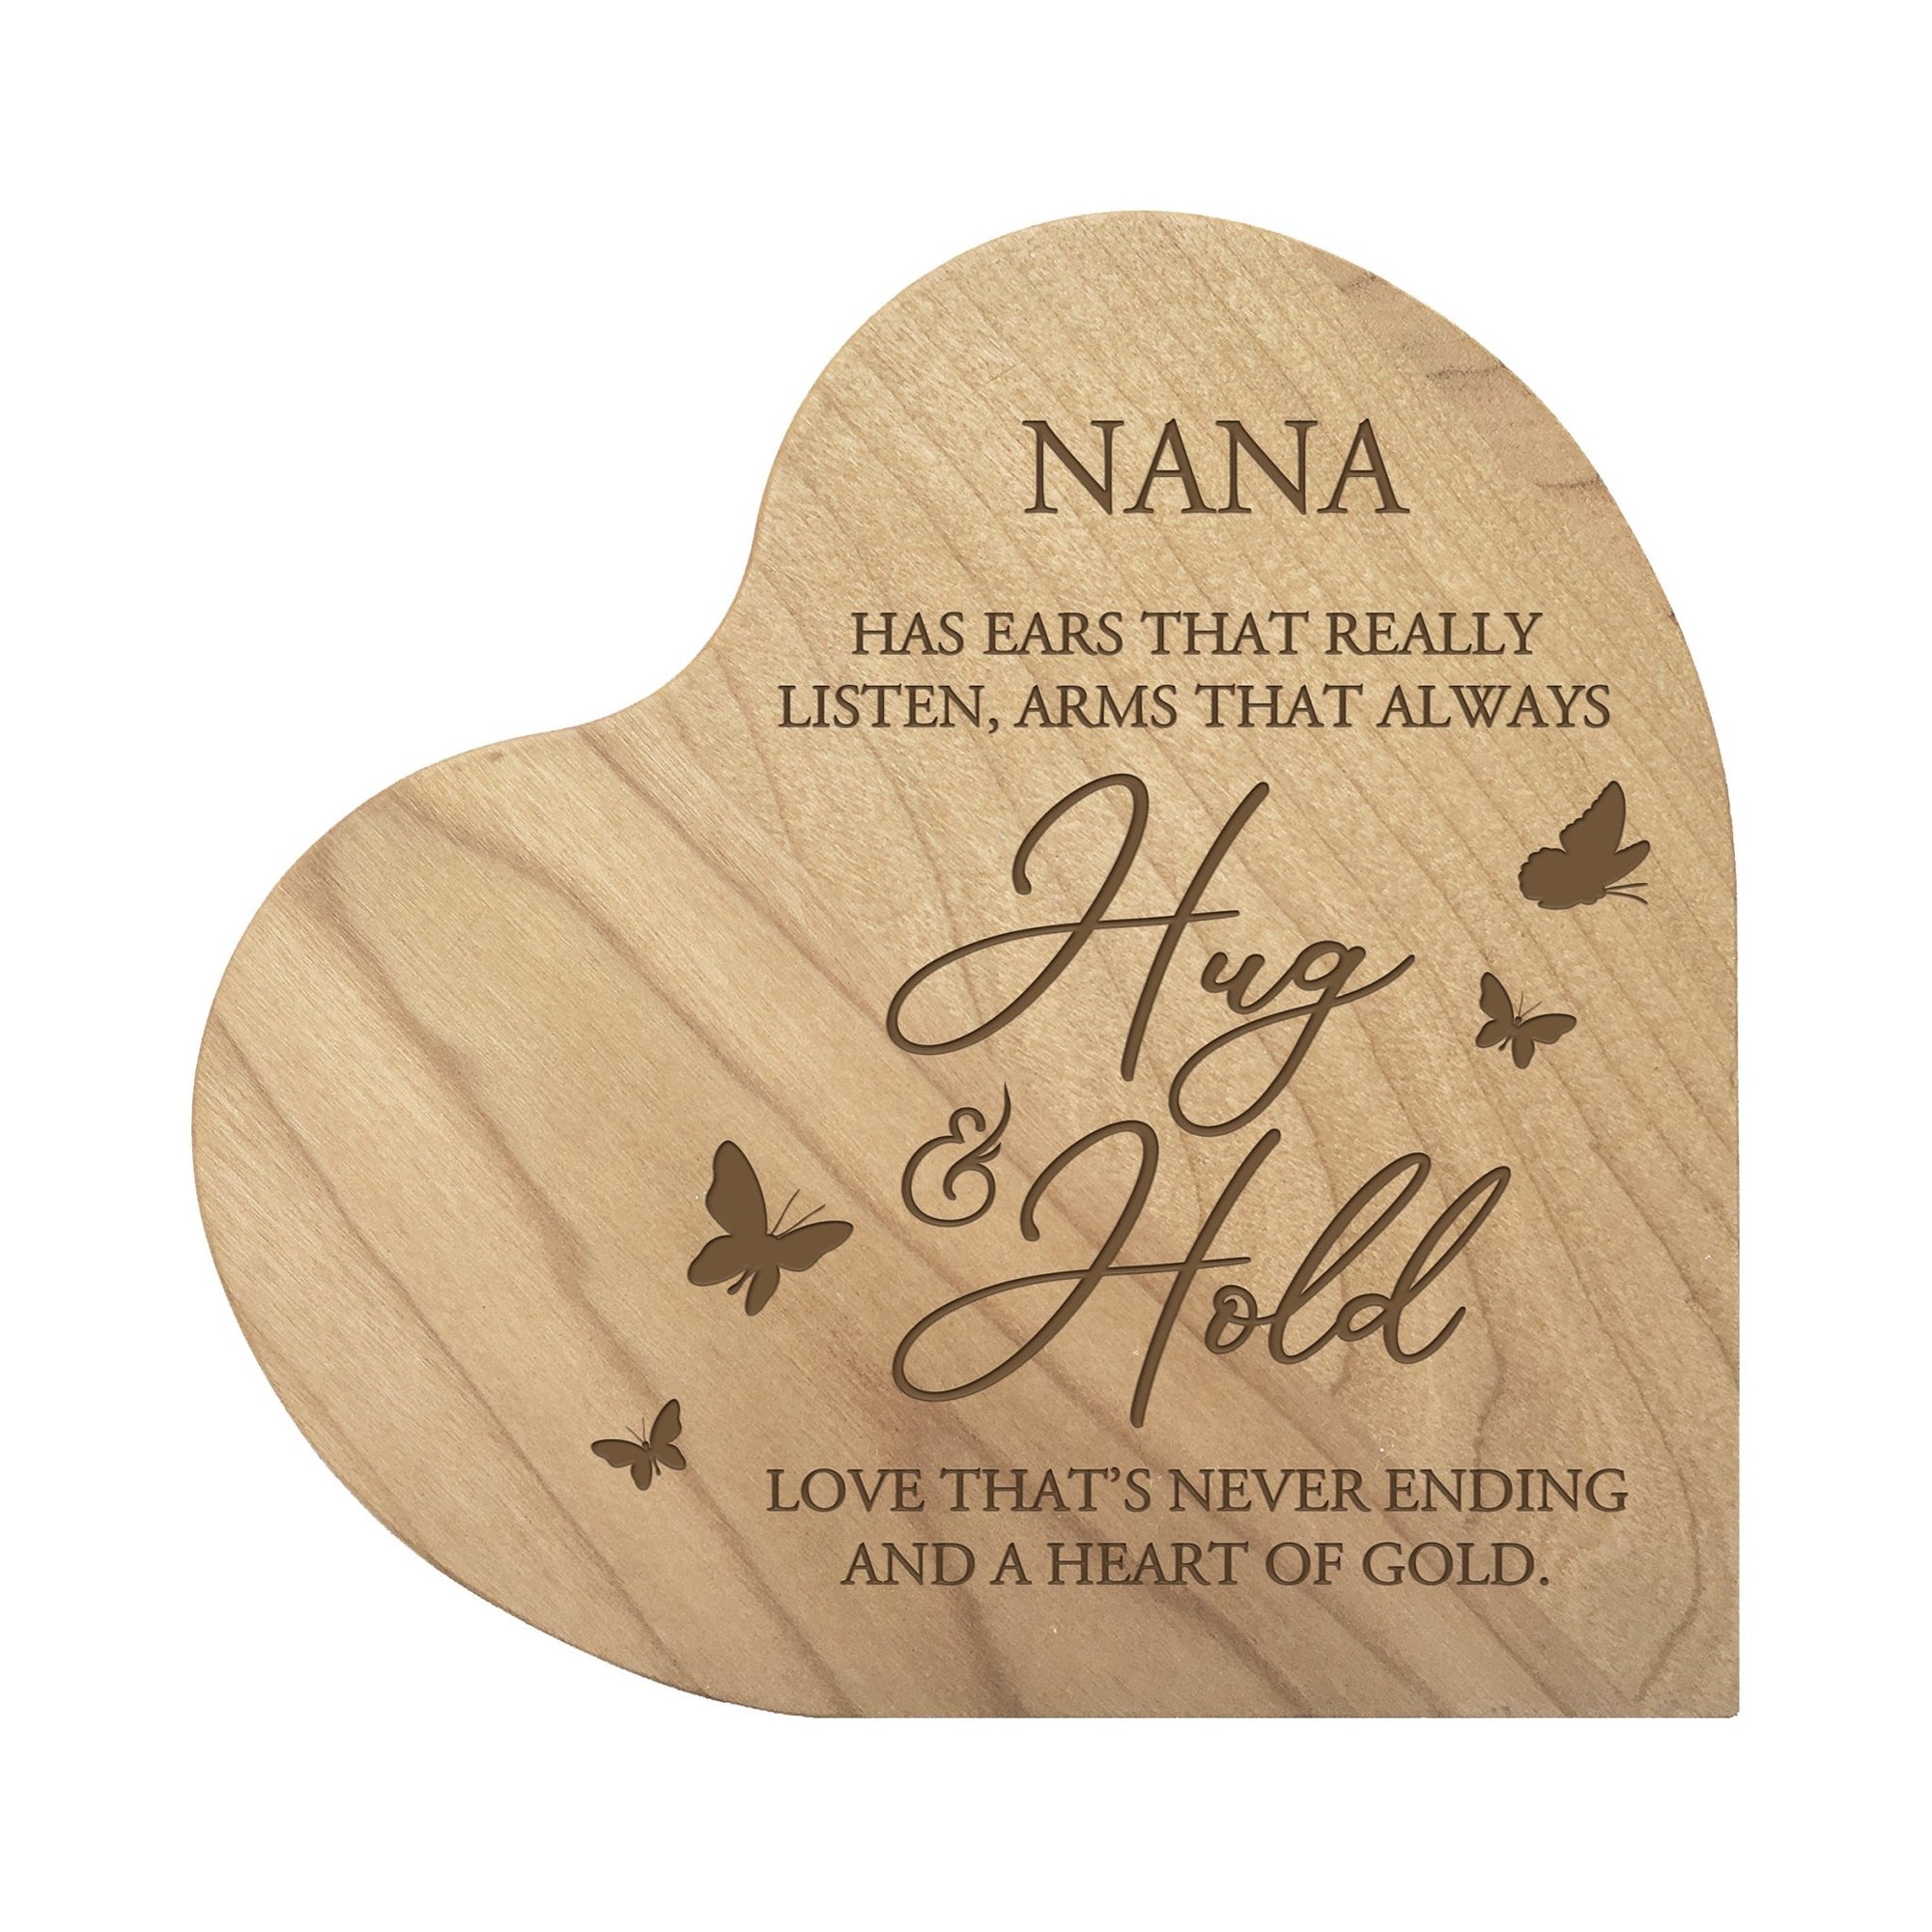 Modern Nana’s Love Solid Wood Heart Decoration With Inspirational Verse Keepsake Gift 5x5.25 - Nana Has Ears That Really = Never Ending - LifeSong Milestones